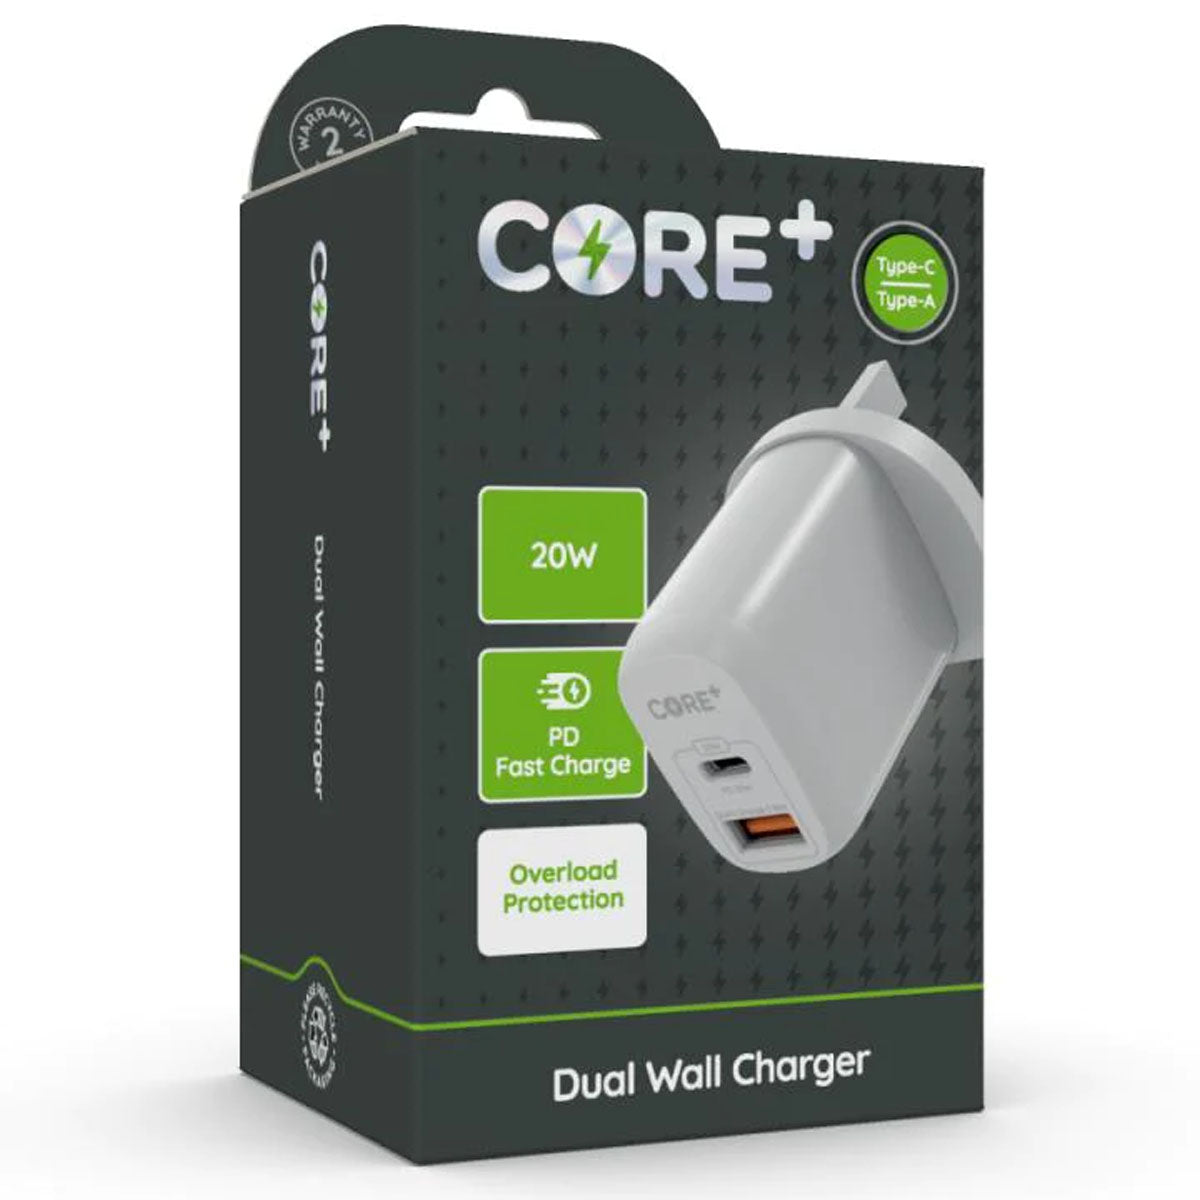 Core+ - Dual Wall Charger - 20W - Continental Food Store